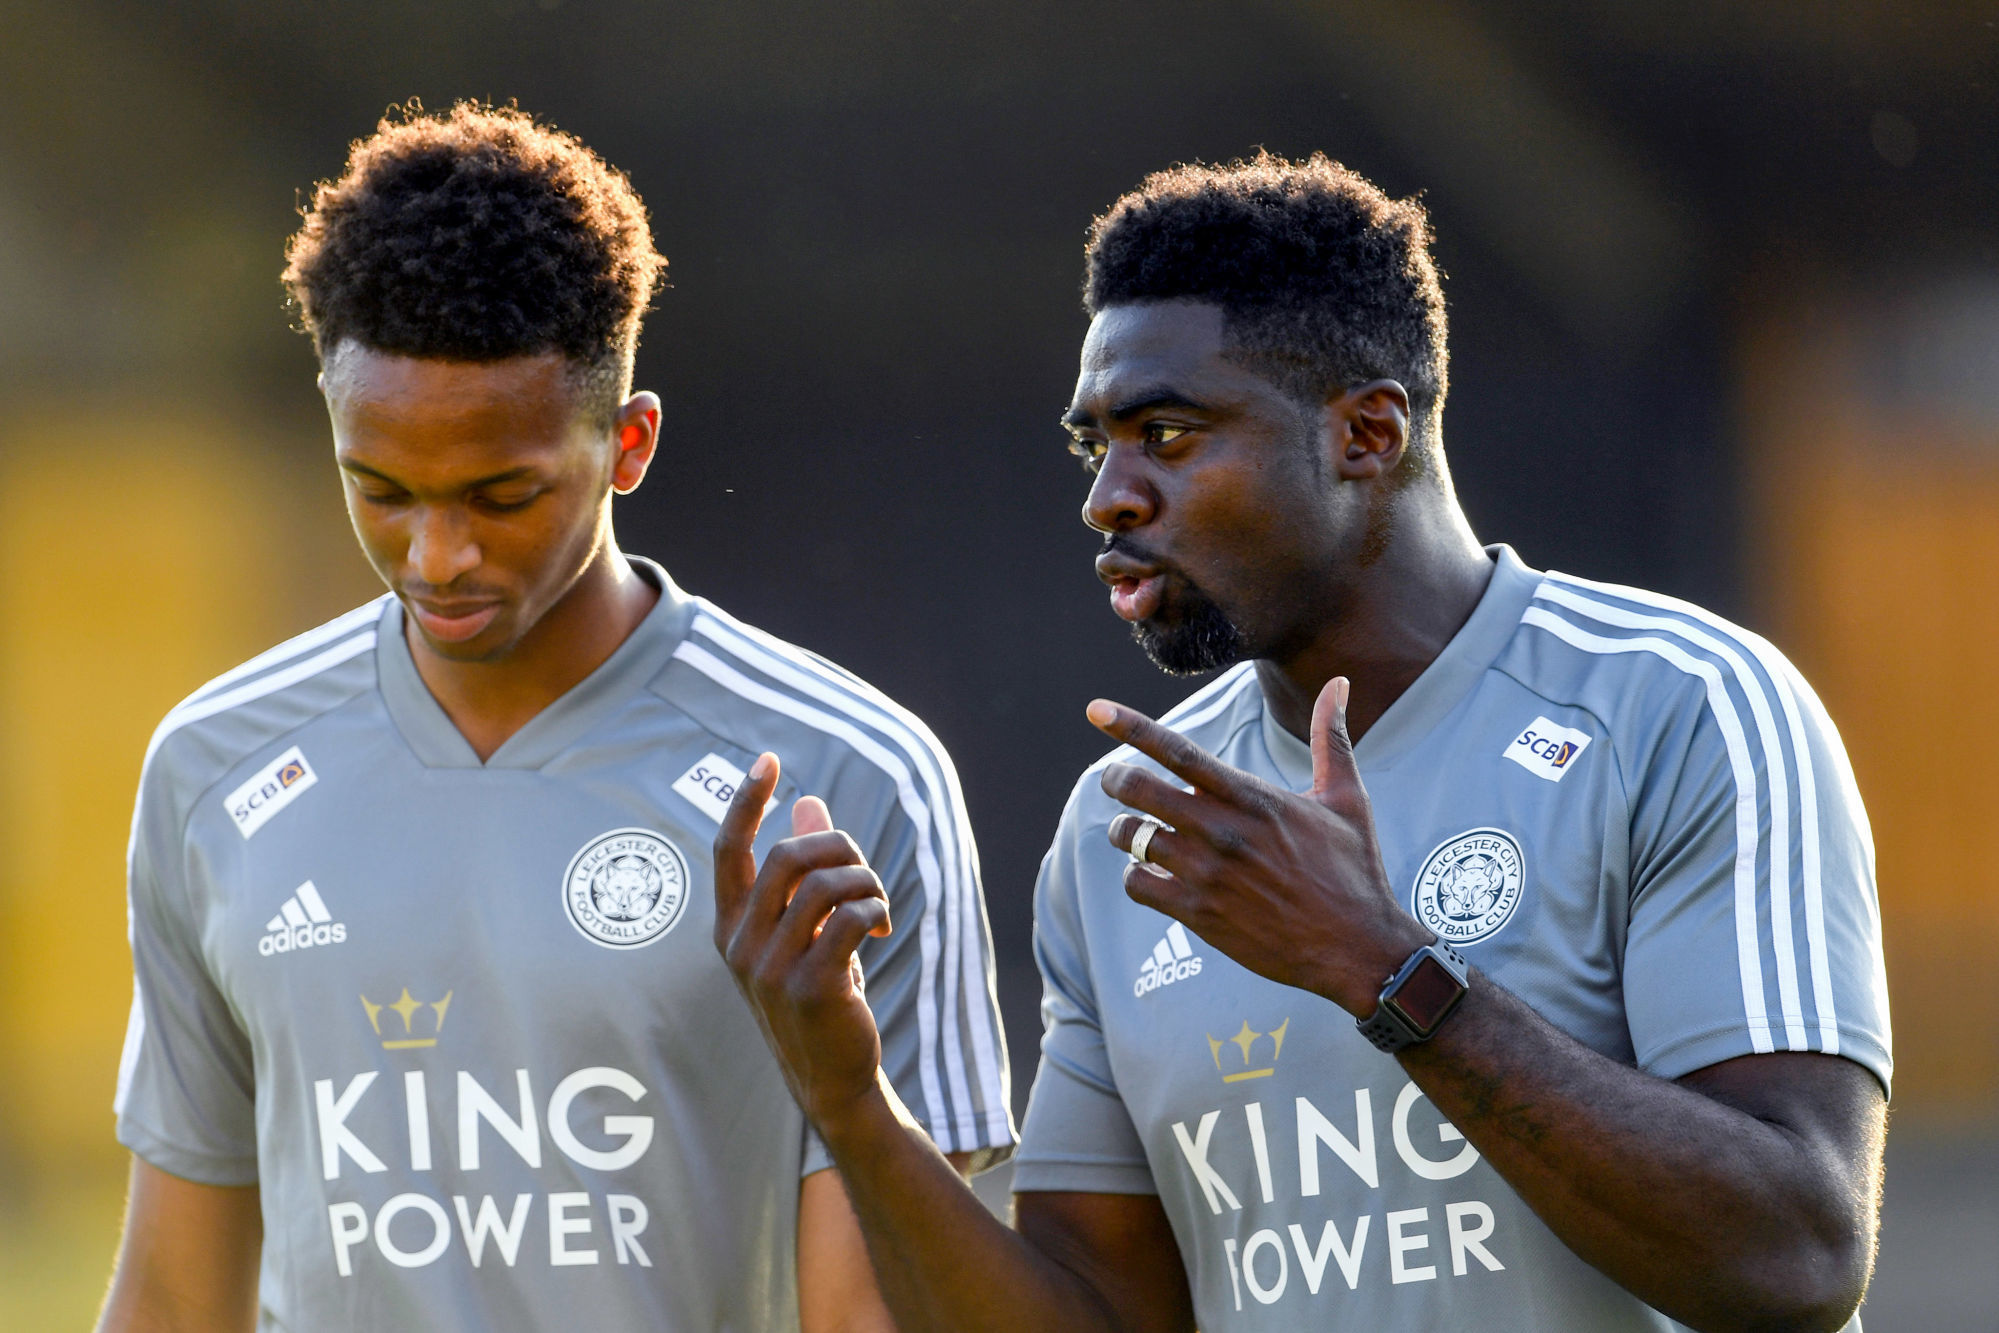 First team coach Kolo Toure (right) talks to Leicester City's Sidnei Tavares of Leicester City during the friendly match between Cambridge United and Leicester City on July 23rd 2019.

Joe Giddens / PA Images / Icon Sport